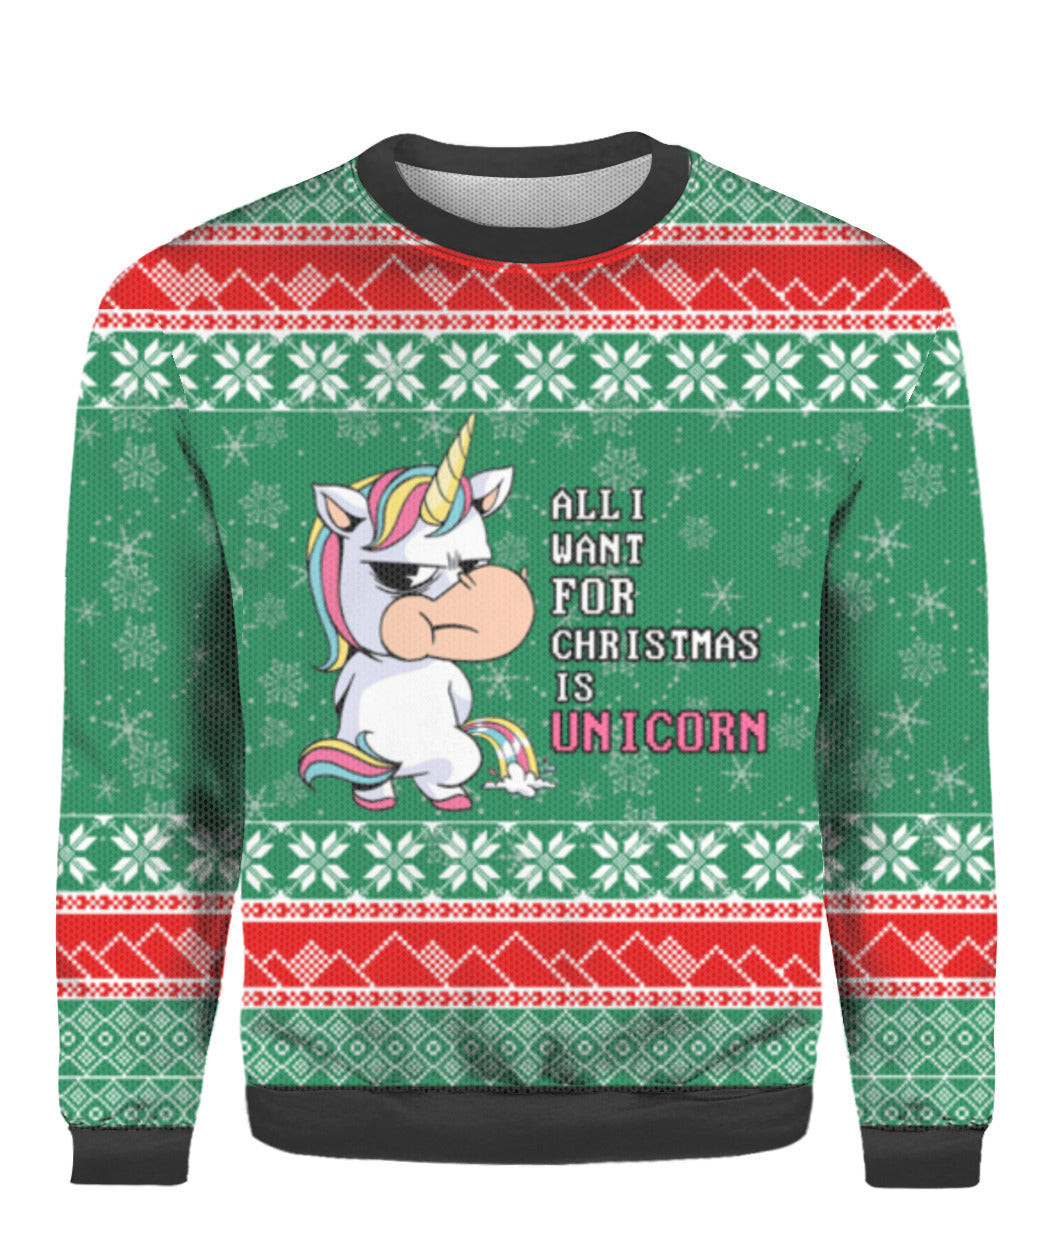 All I Want For Christmas Is A Unicorn Ugly Christmas Sweater Ugly Sweater For Men Women, Holiday Sweater